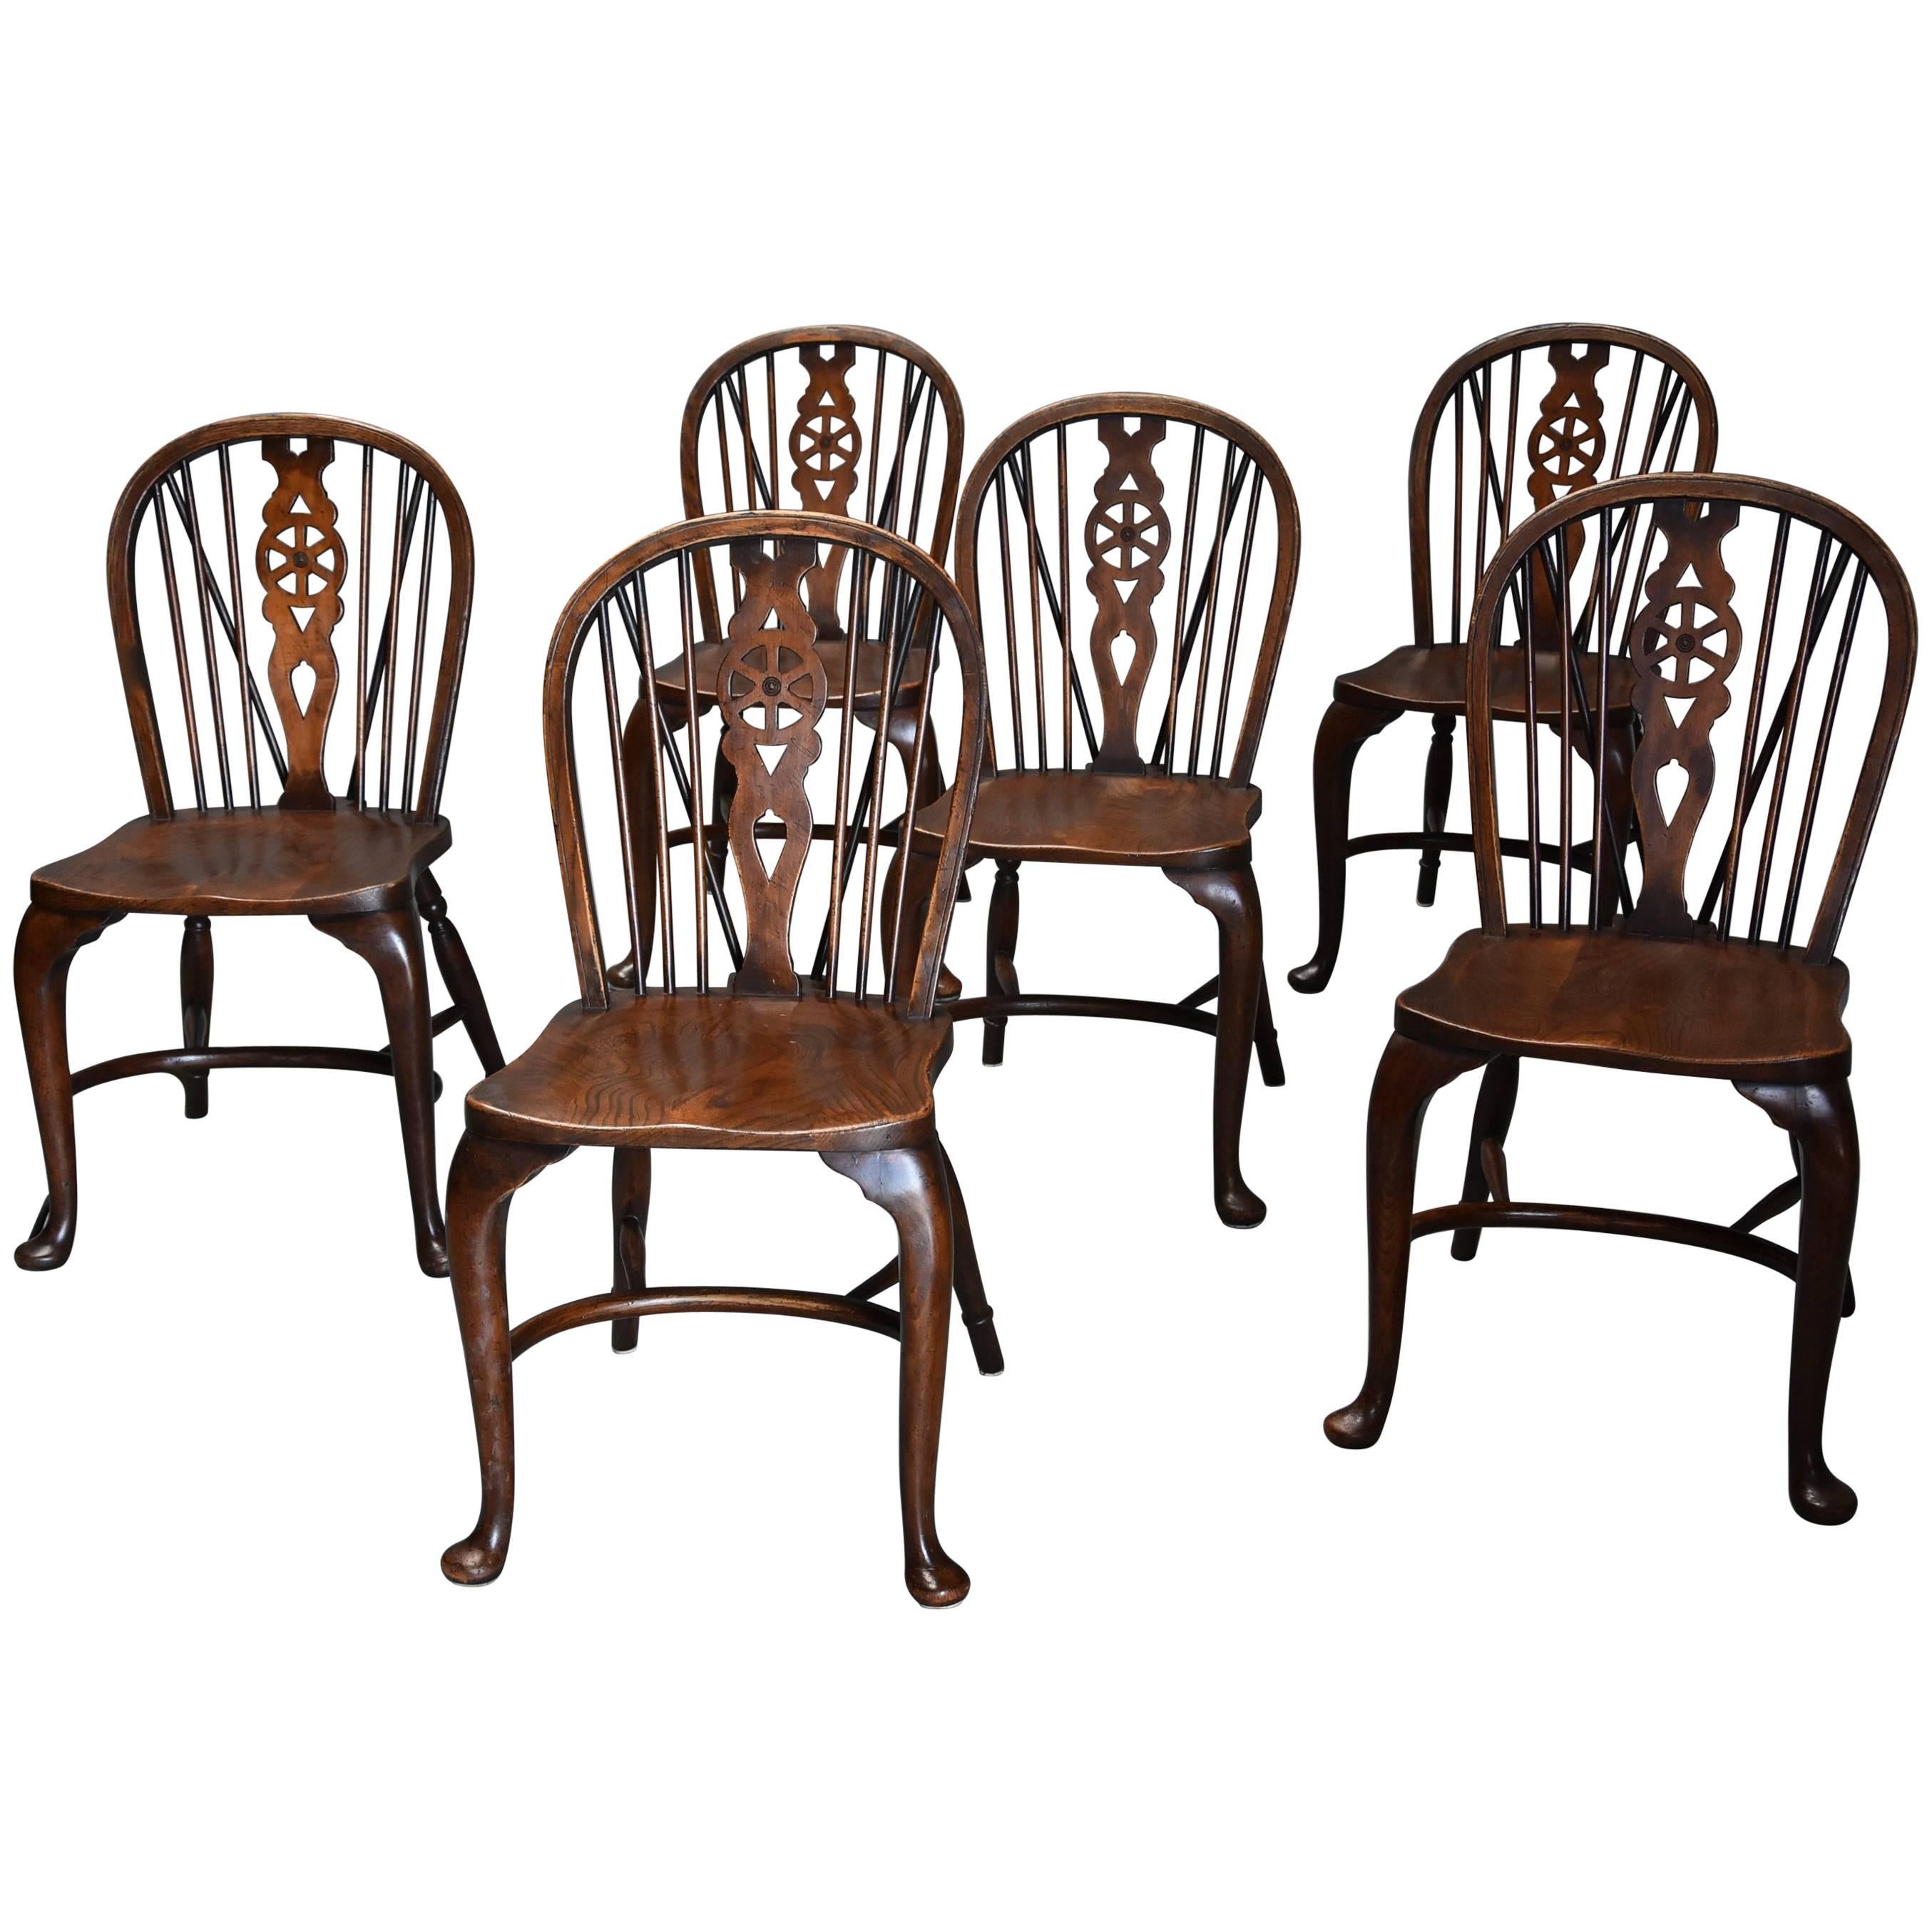 Superb Set of Six Ash and Beech Wheelback Windsor Chairs with Cabriole Leg